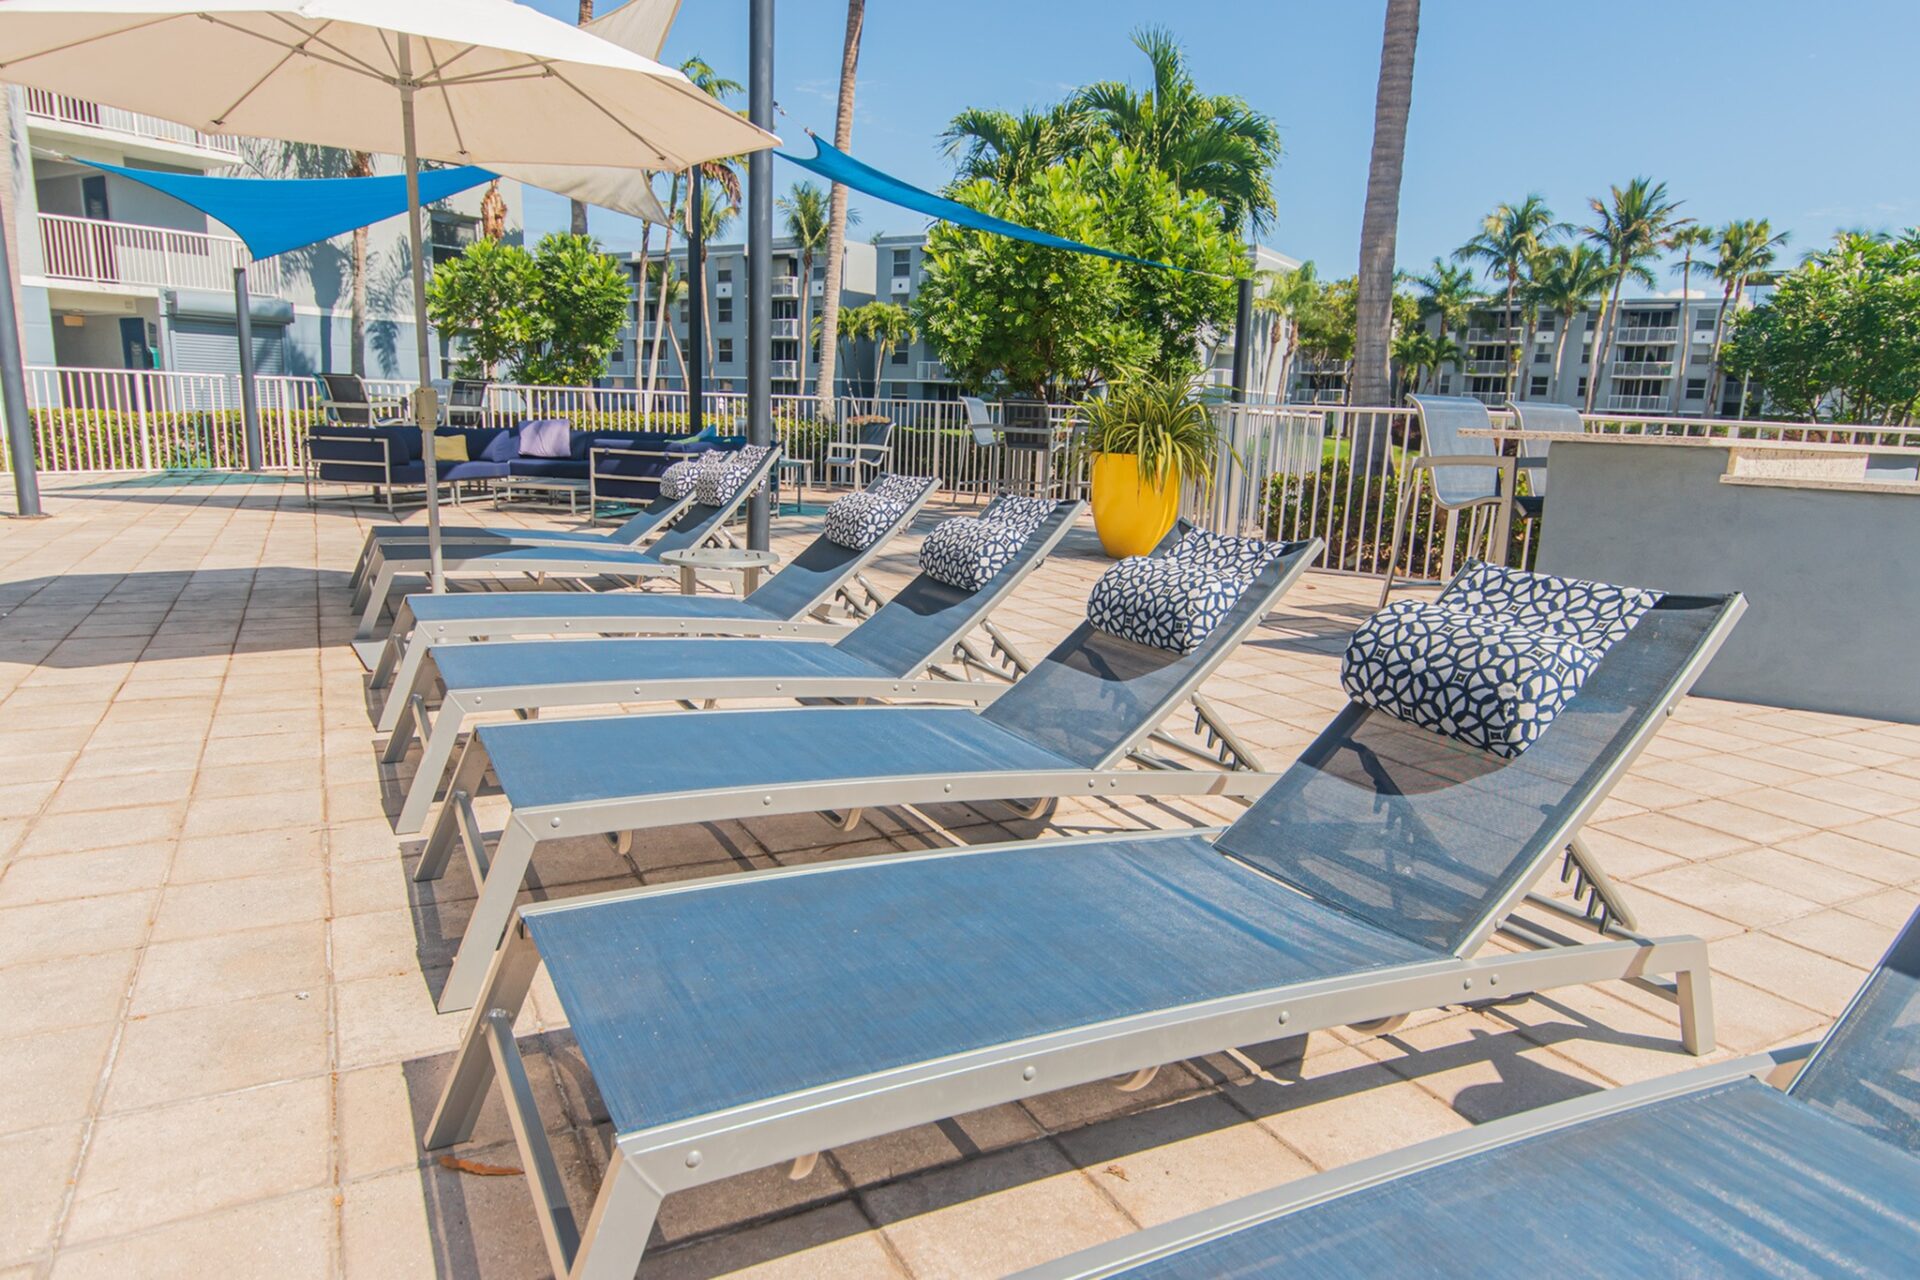 A line of outdoor lounge chairs in the pool area.